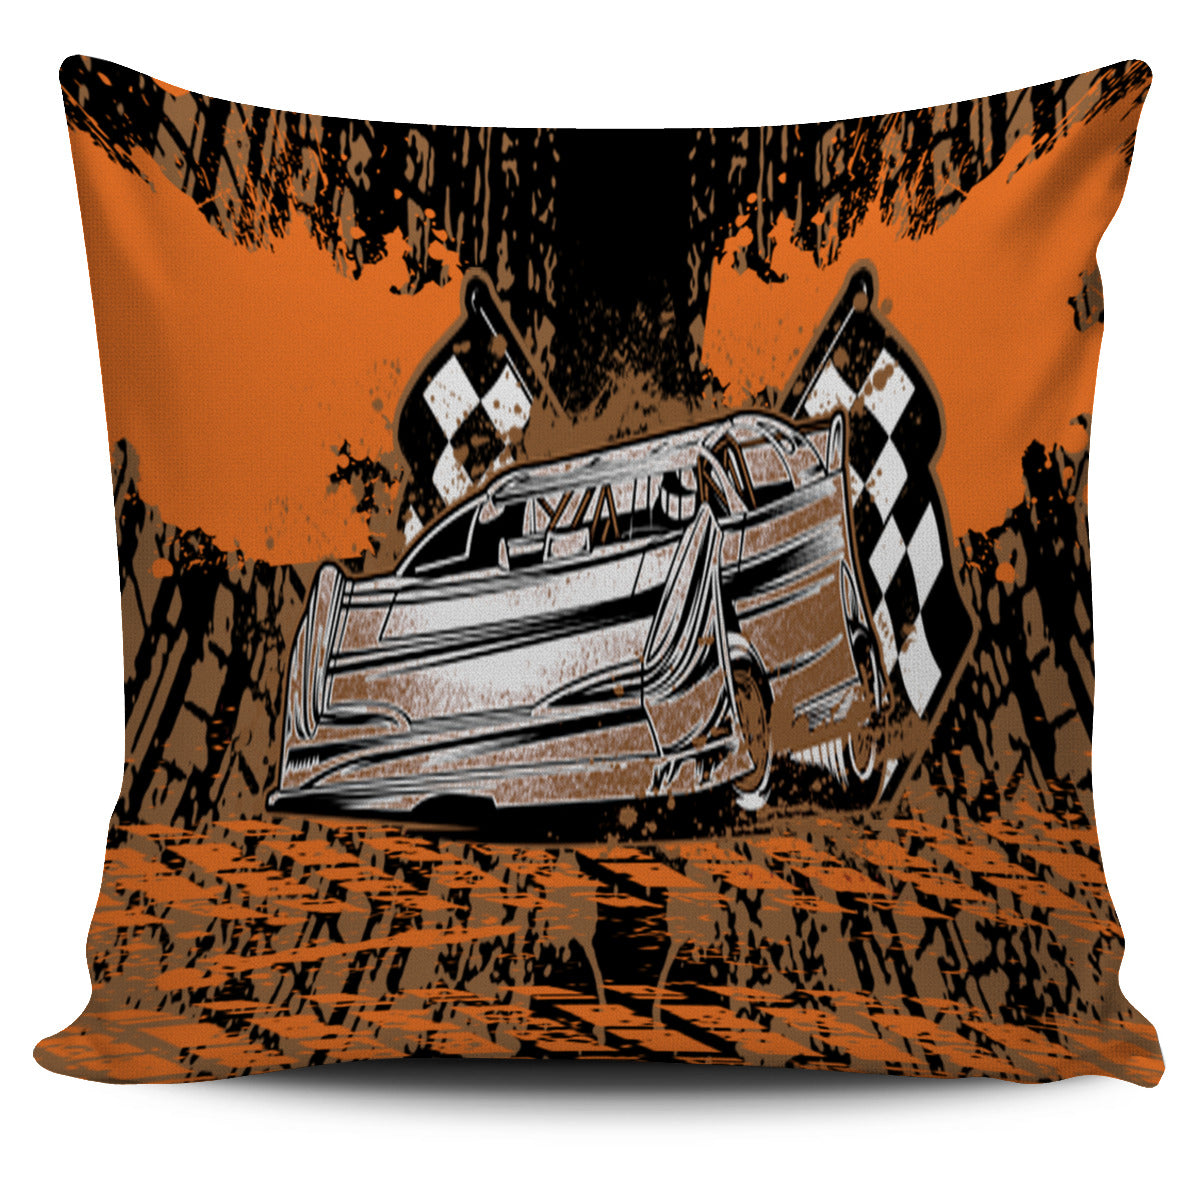 Late Model Pillow Cover